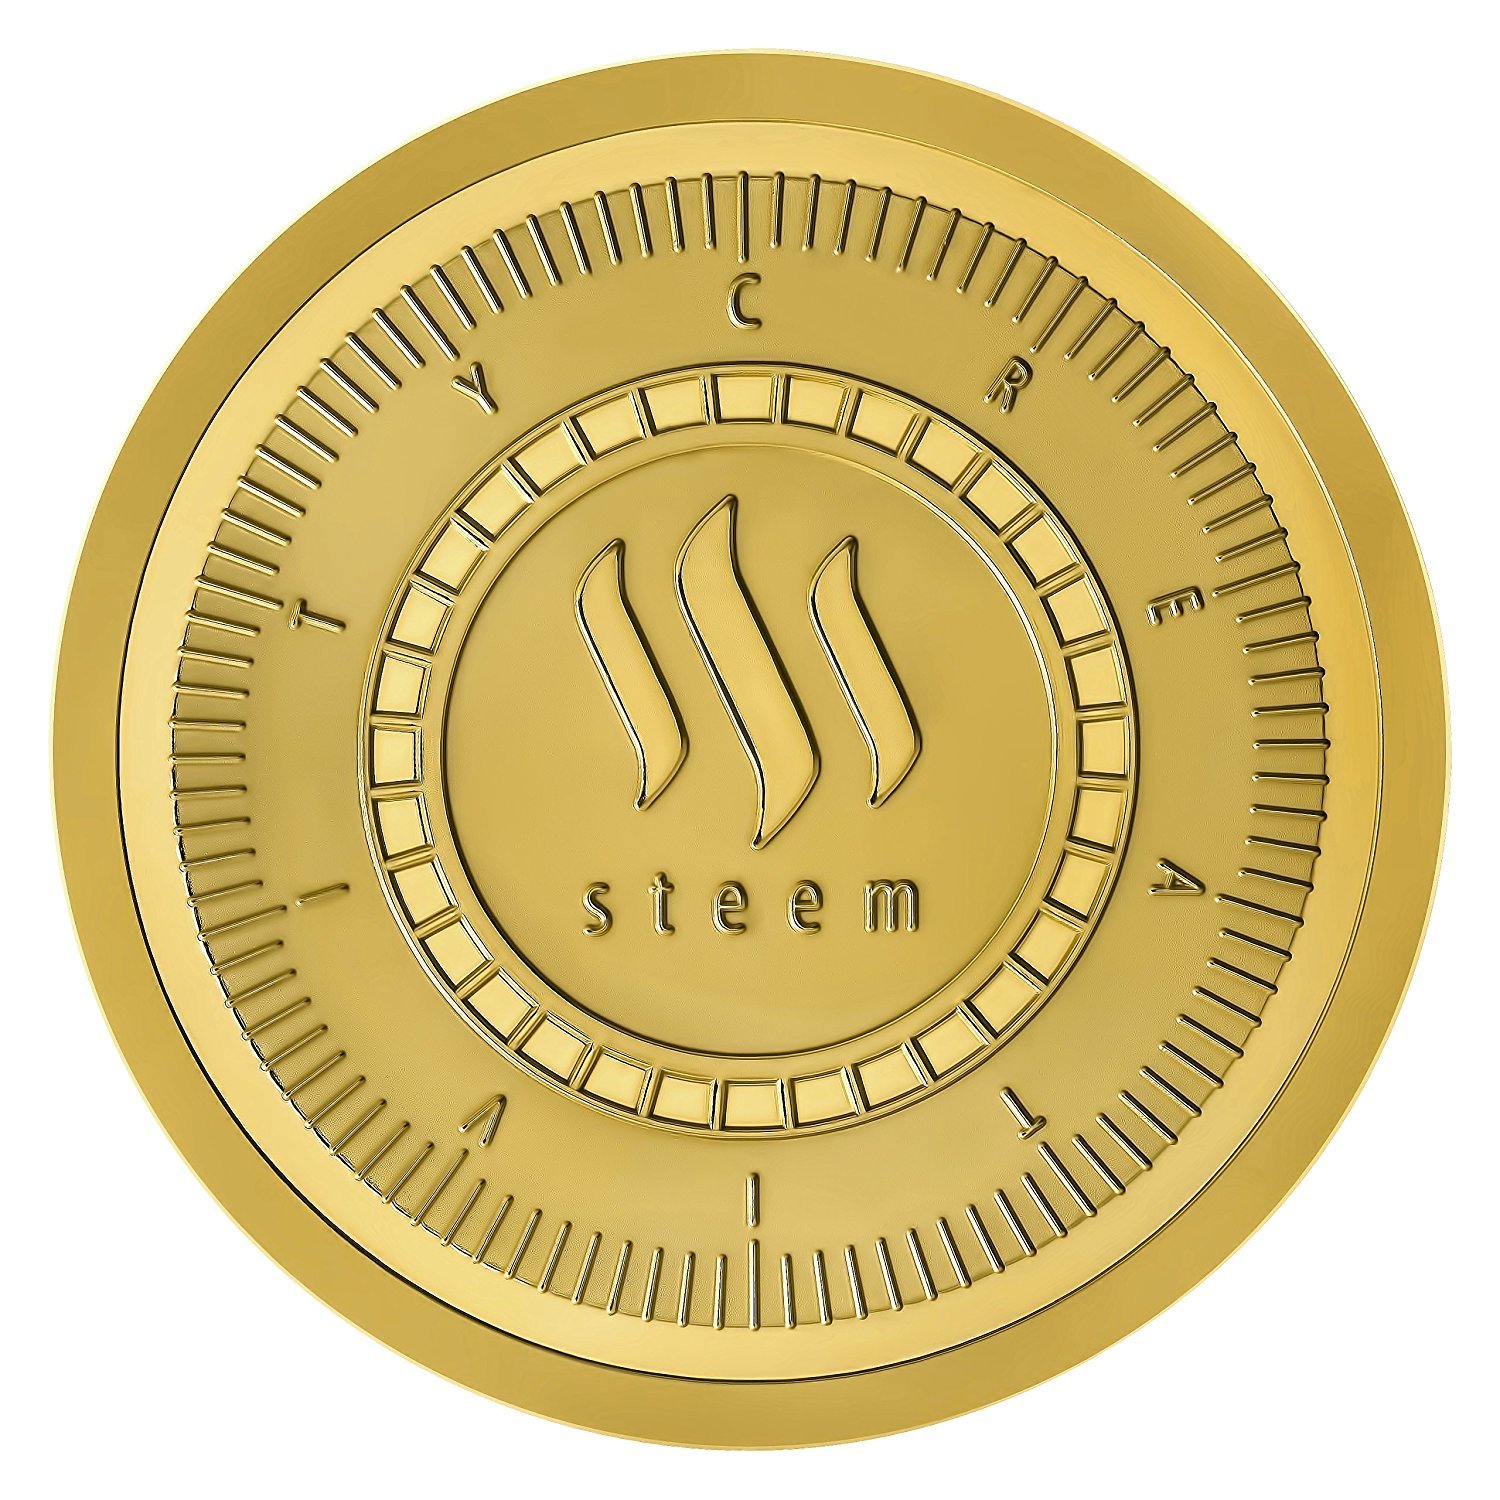 Another Steem Coin? Have a look for more details. — Steemit